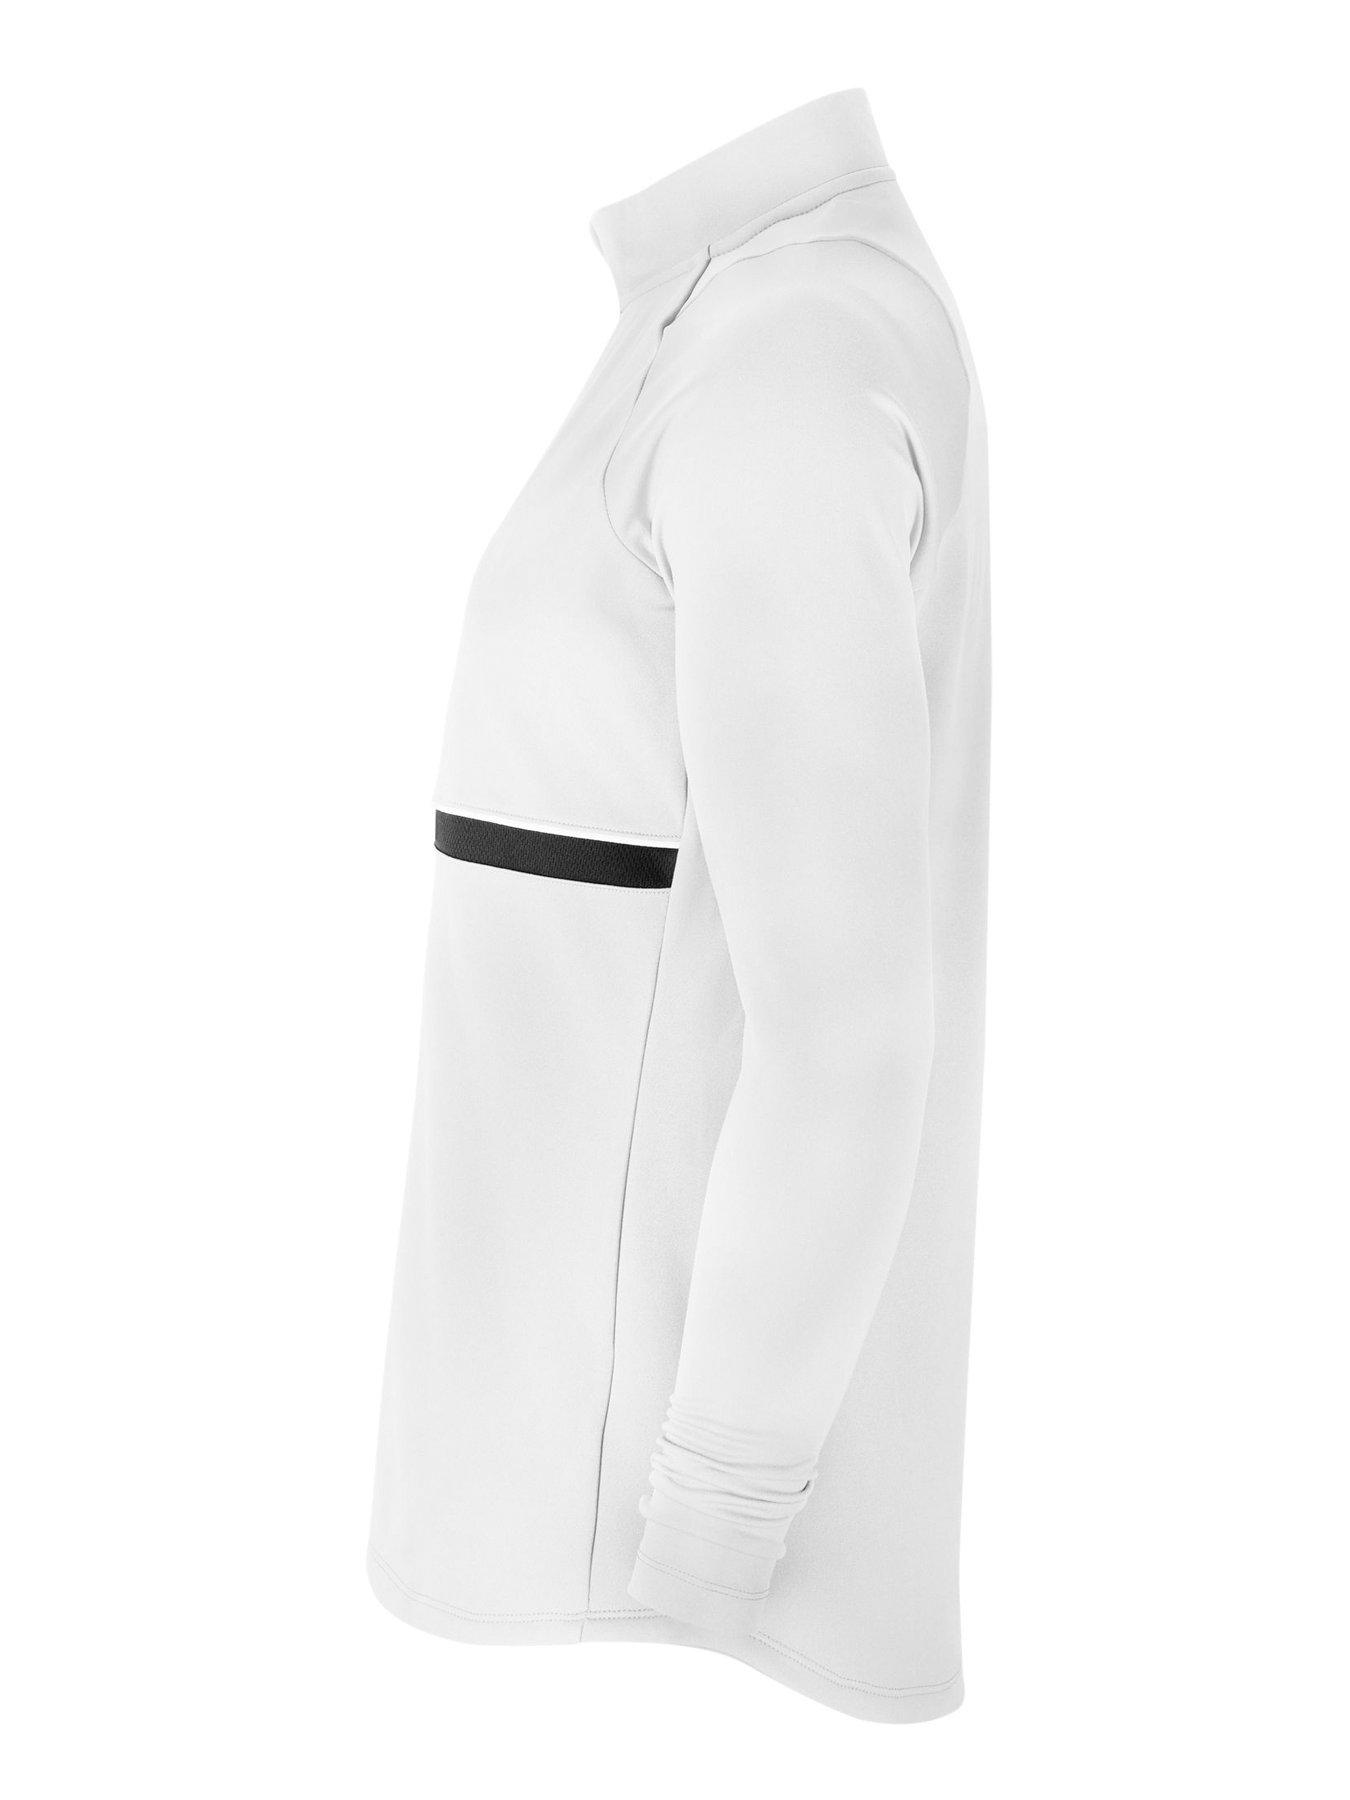  Academy 21 Dry Drill Top - White